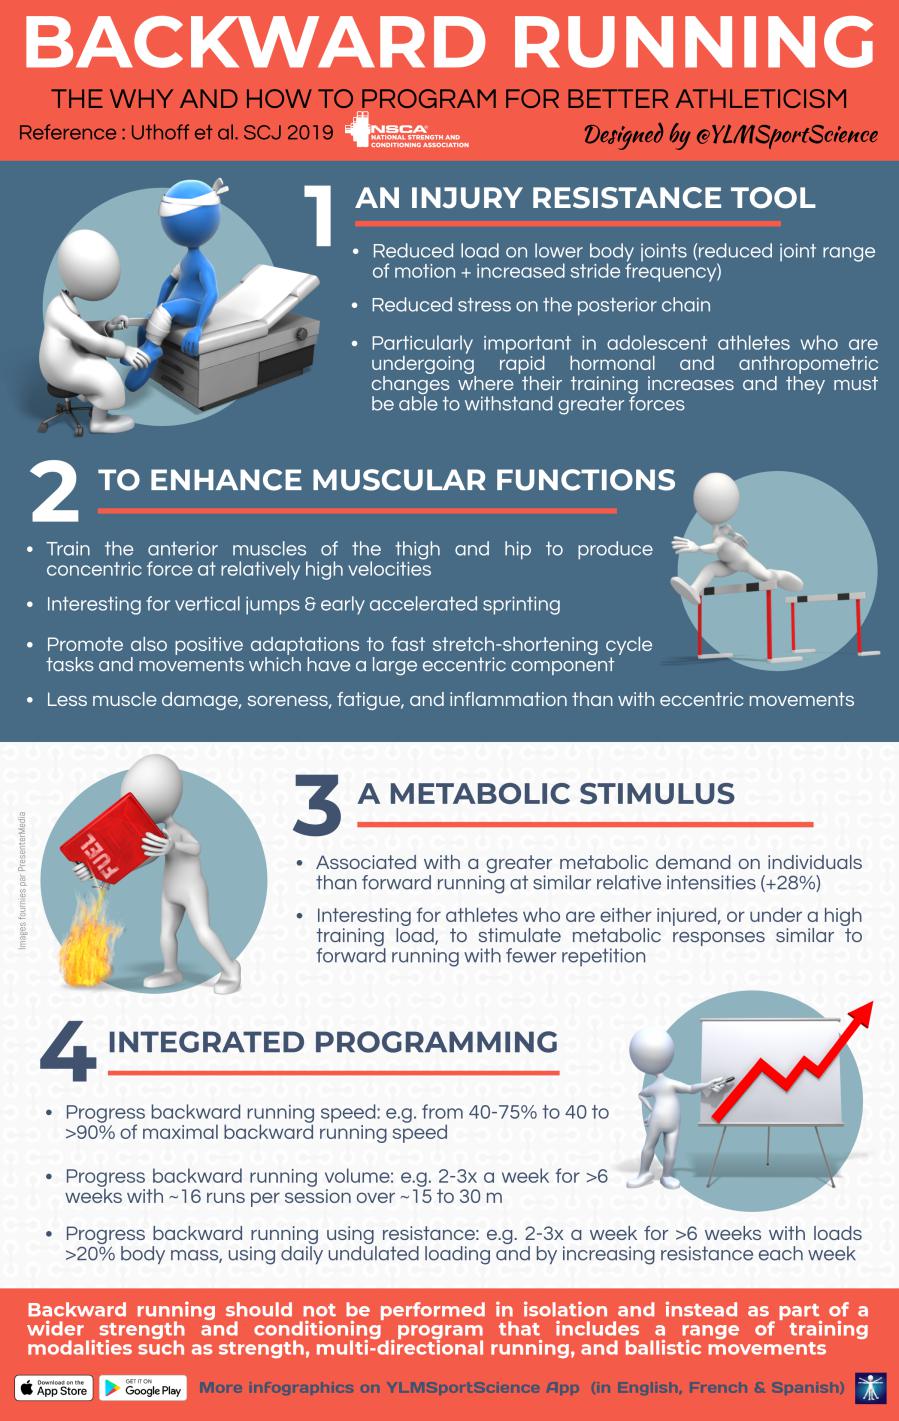 This infographic shows how implementing backward running into a strength and conditioning program can be used as an injury resistance tool, enhance muscular functions, and increase metabolic demands for athletes.